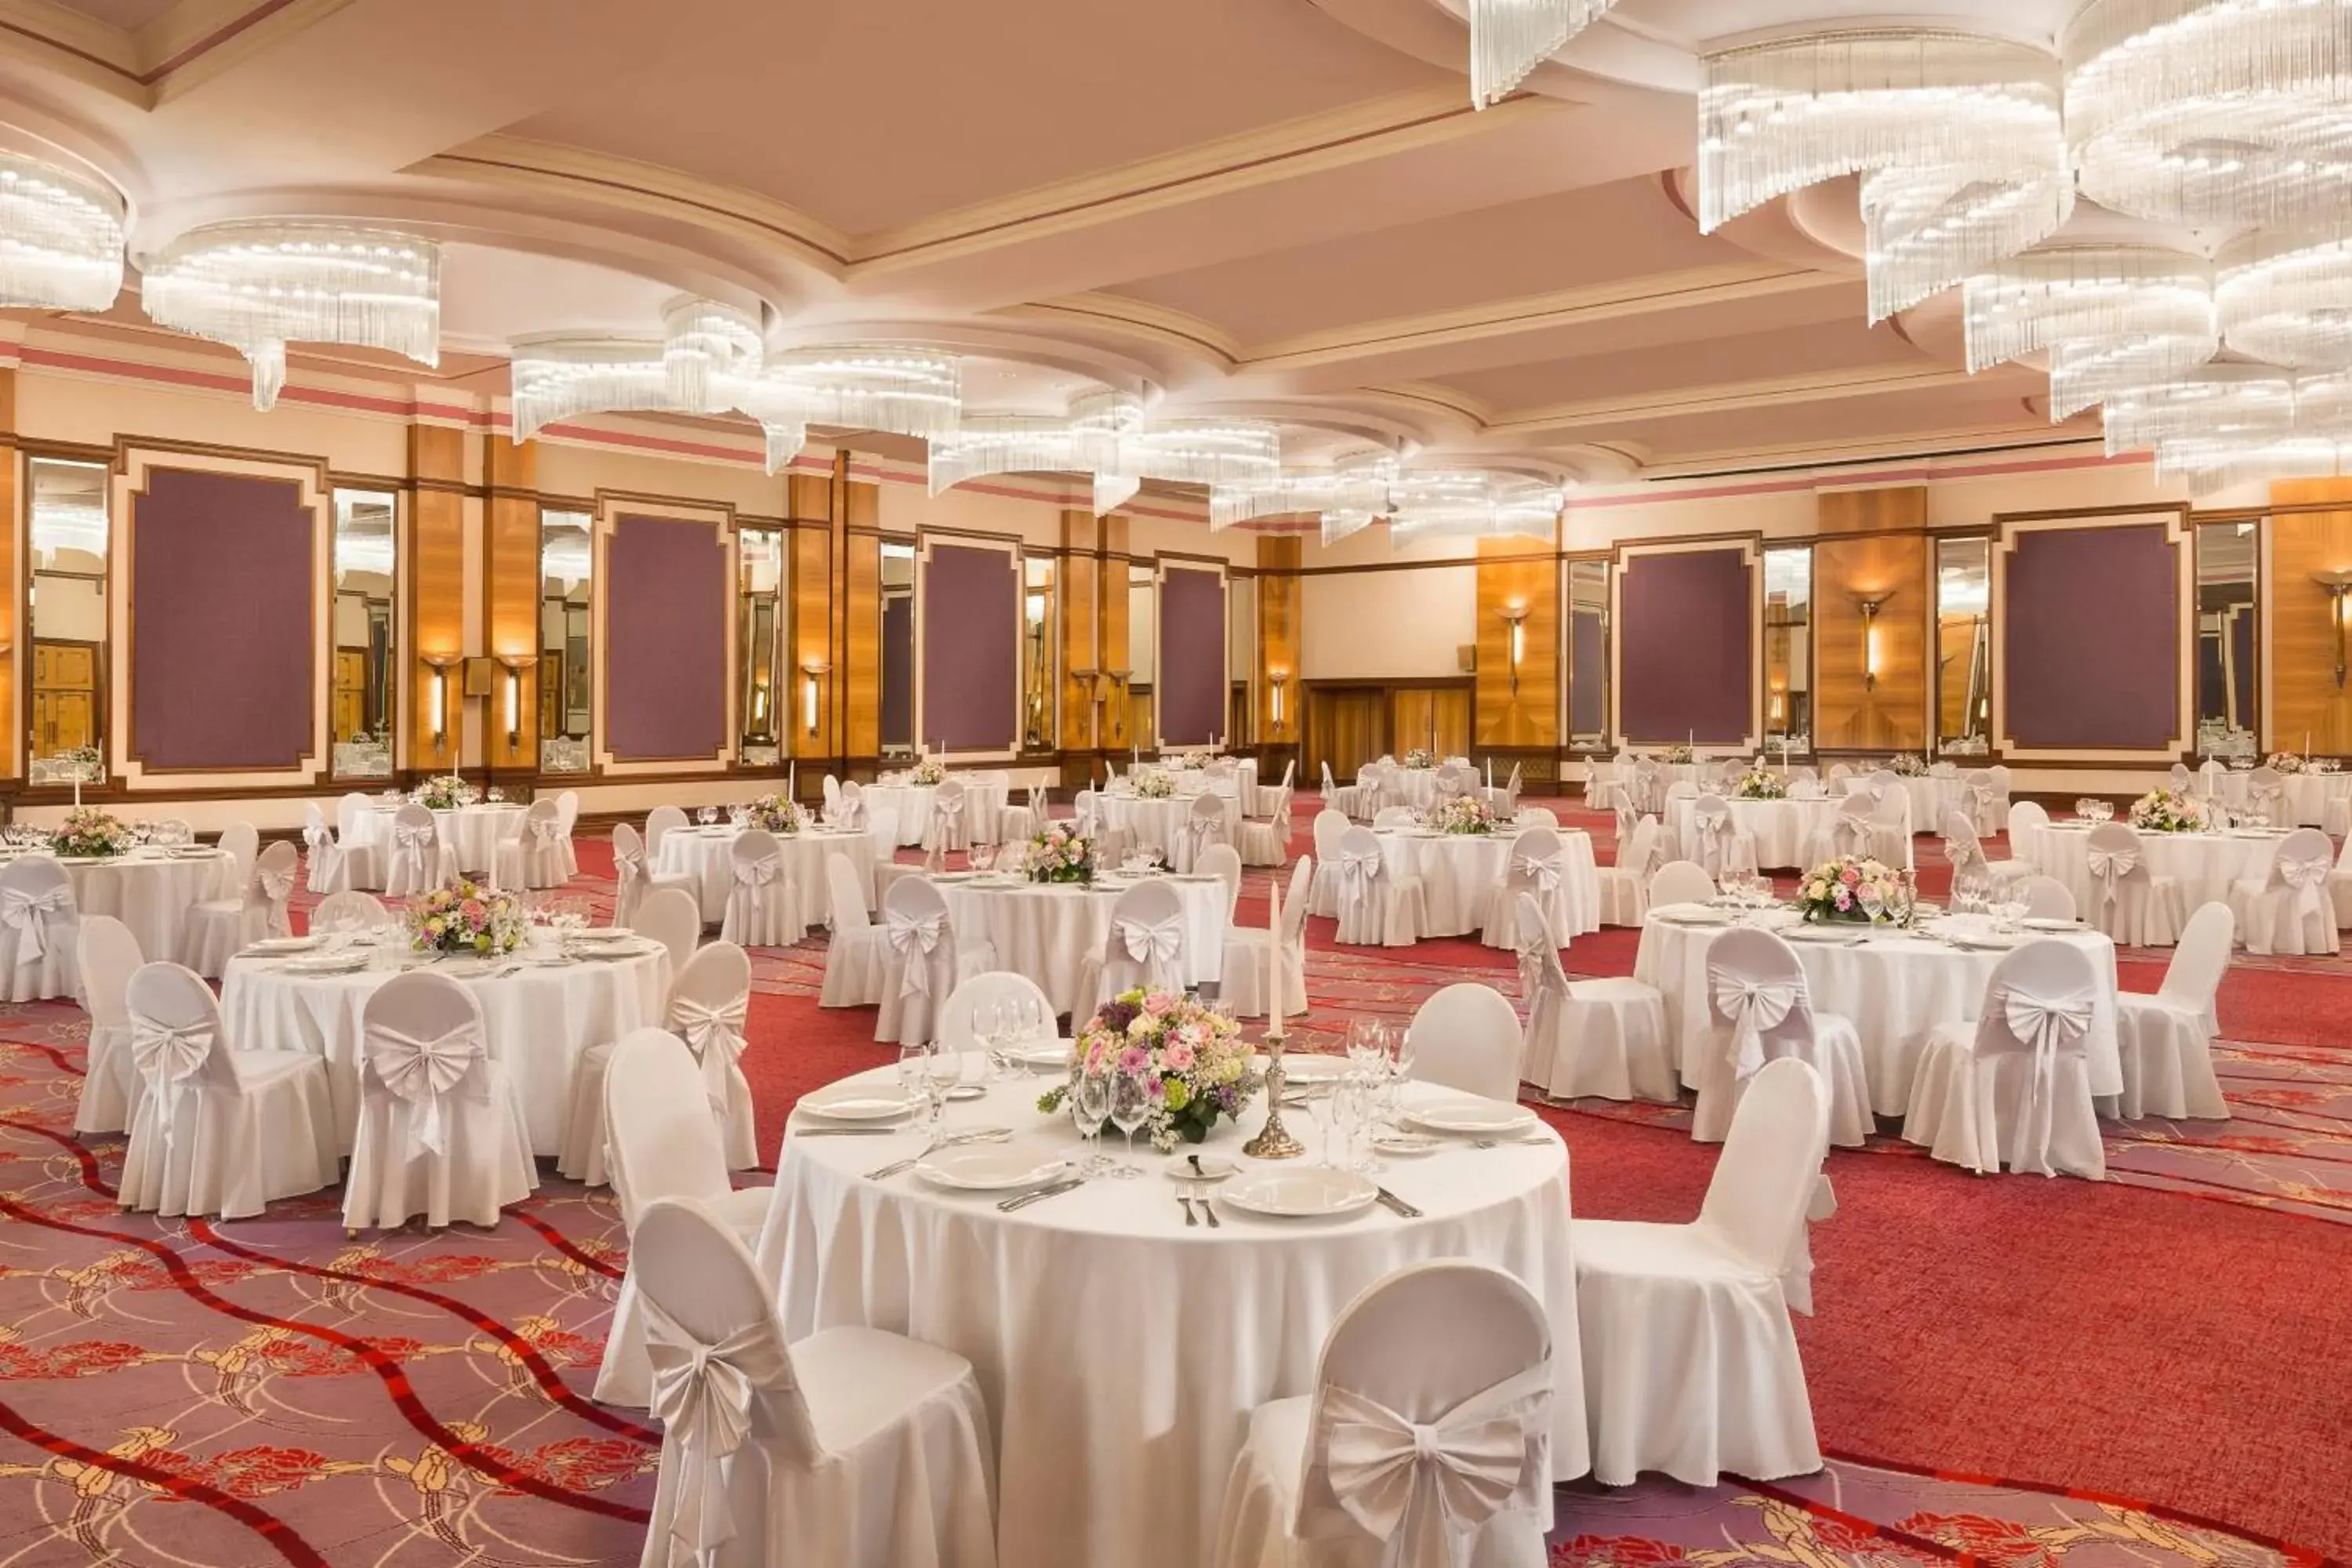 Banquet/Function facilities, Banquet Facilities in The Westin Zagreb